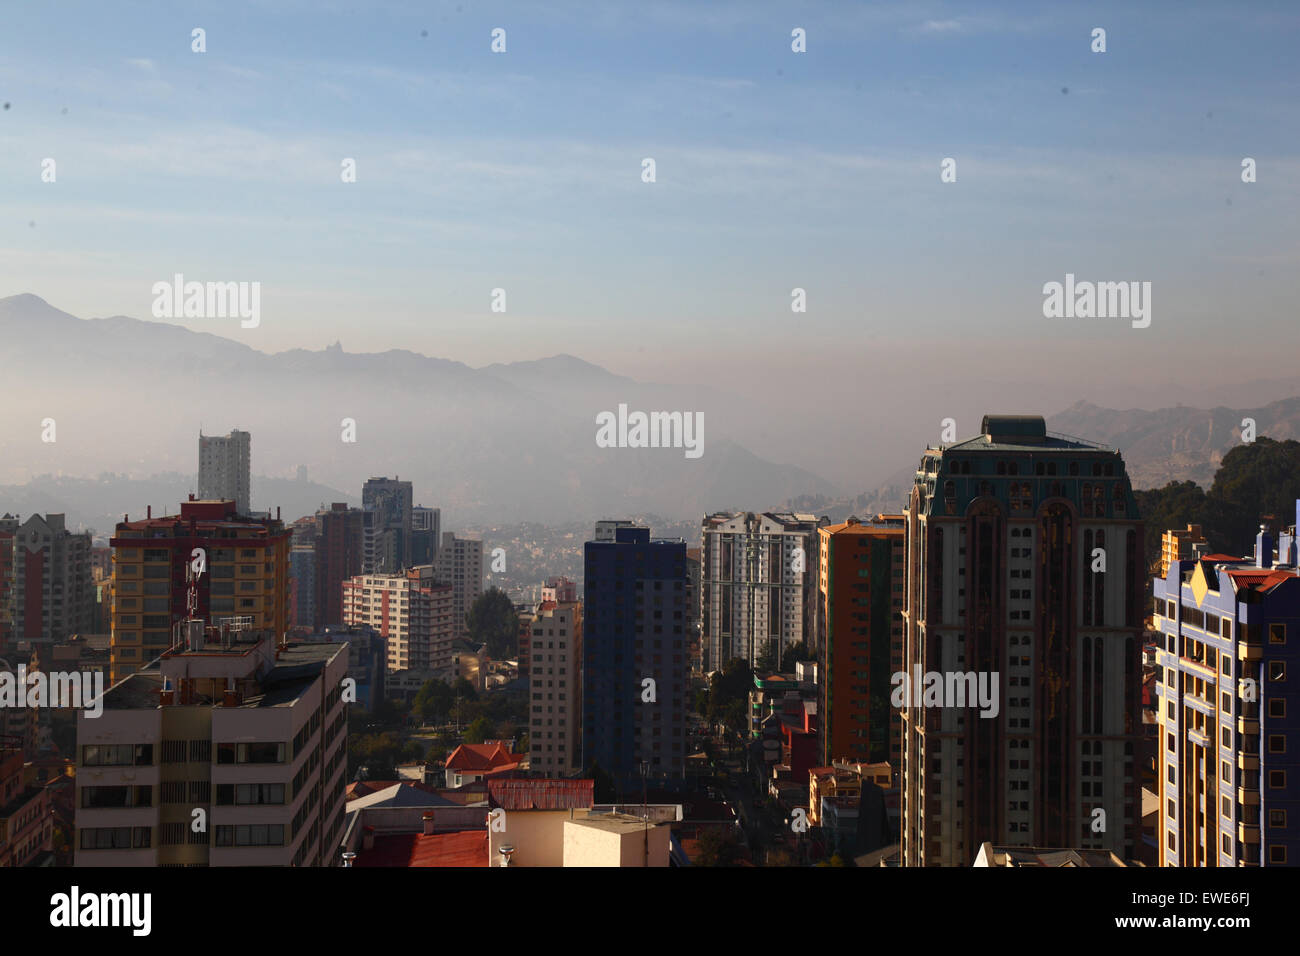 La Paz, Bolivia, 24th June 2015. Smoke fills the valleys of the lower part of La Paz shortly after sunrise after San Juan night. San Juan is traditionally believed to be the coldest part of the year and many people in Bolivia light bonfires and set off fireworks. Local authorities have been attempting to stop this custom in the last few years to reduce the extra pollution it causes in the city, but with only limited success. Stock Photo